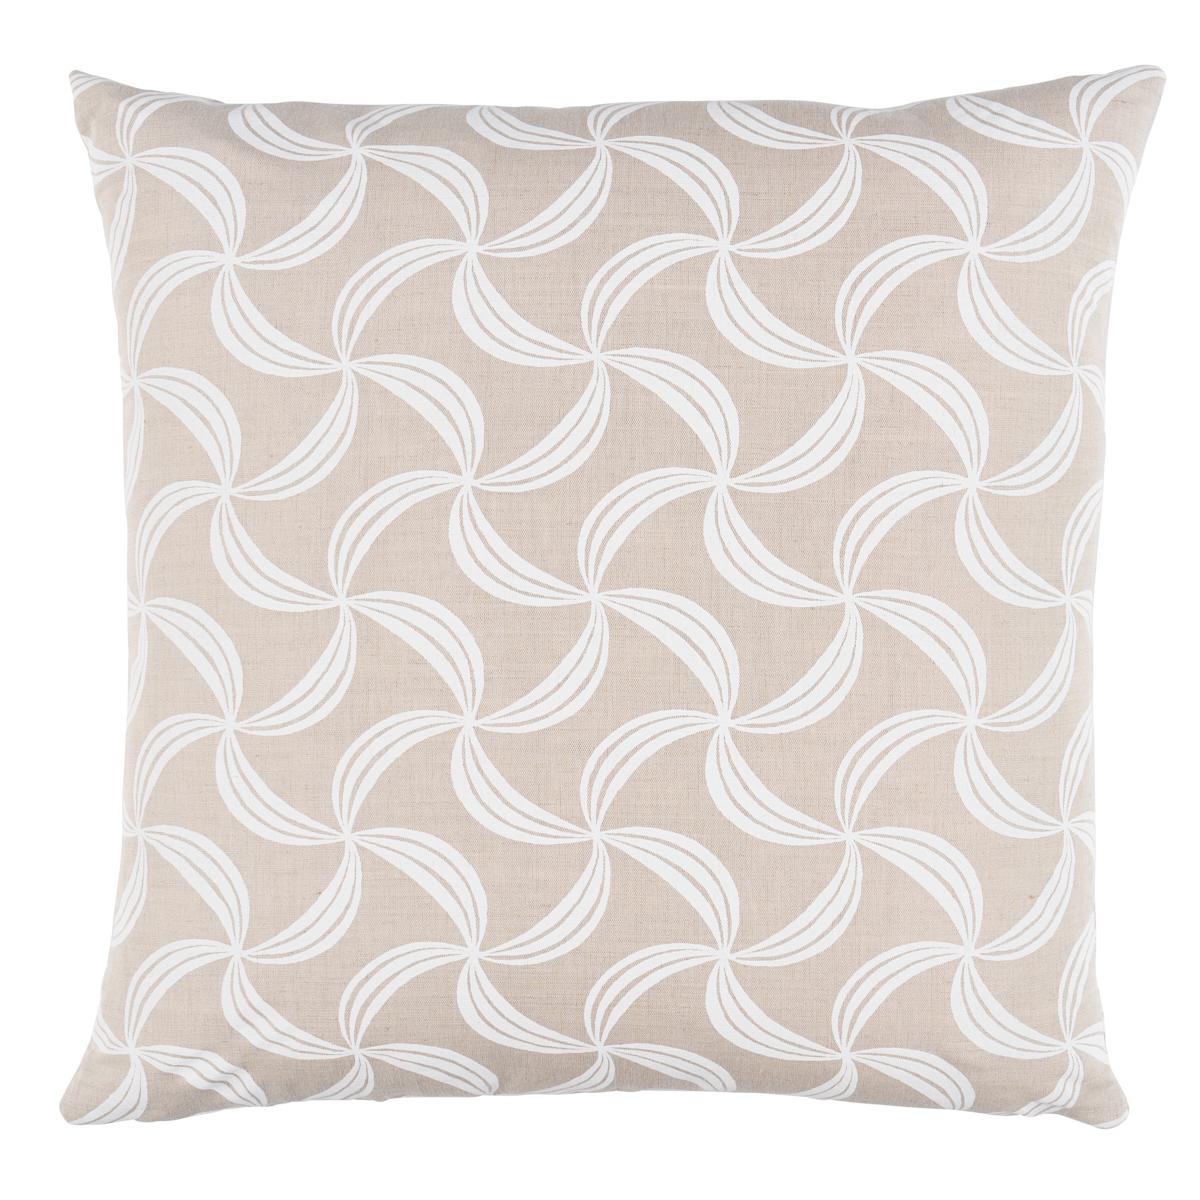 Ambrosia Pillow in Natural 20 x 20" For Sale